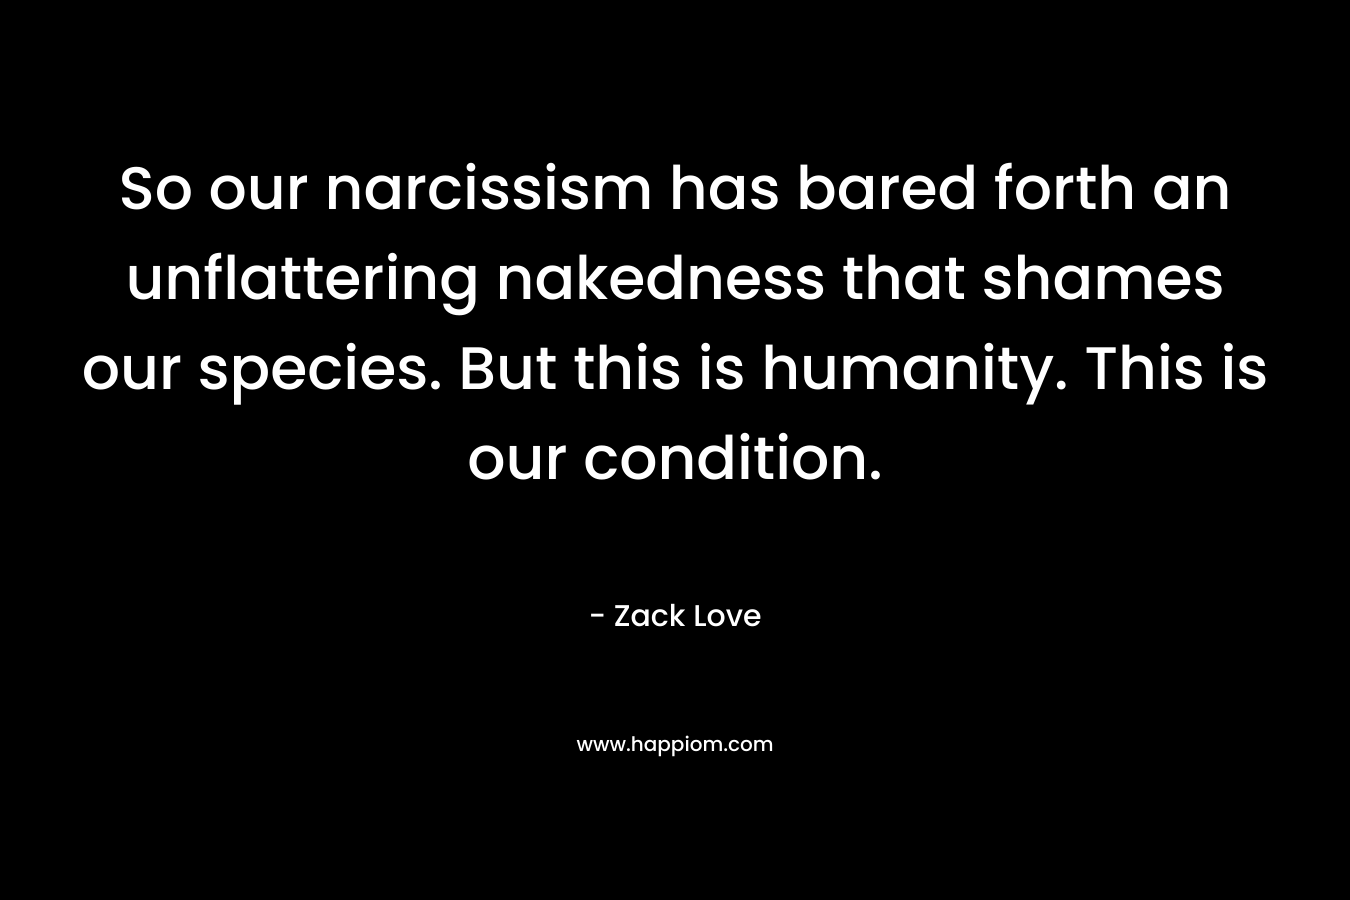 So our narcissism has bared forth an unflattering nakedness that shames our species. But this is humanity. This is our condition. – Zack Love